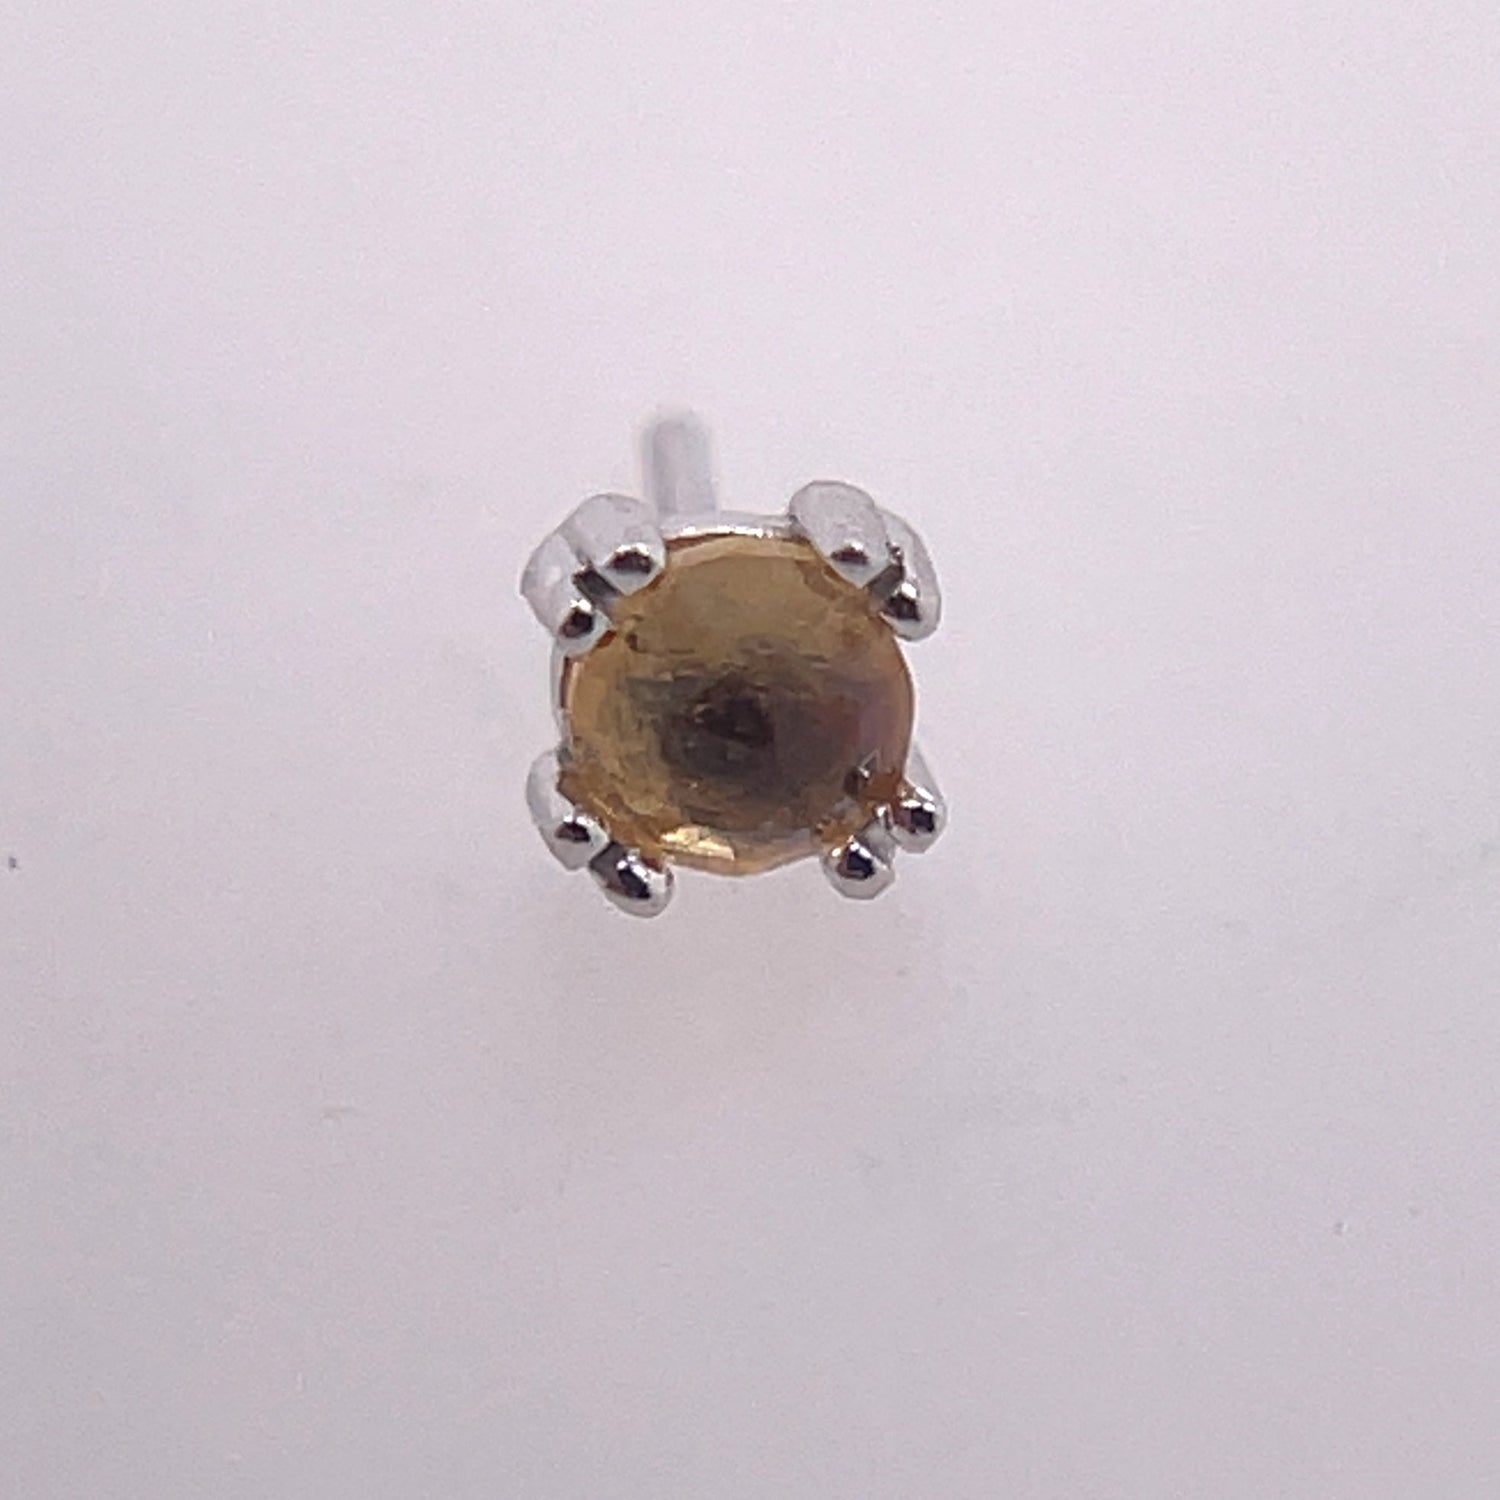 2.5mm Round Cab Prong - Agave in Bloom